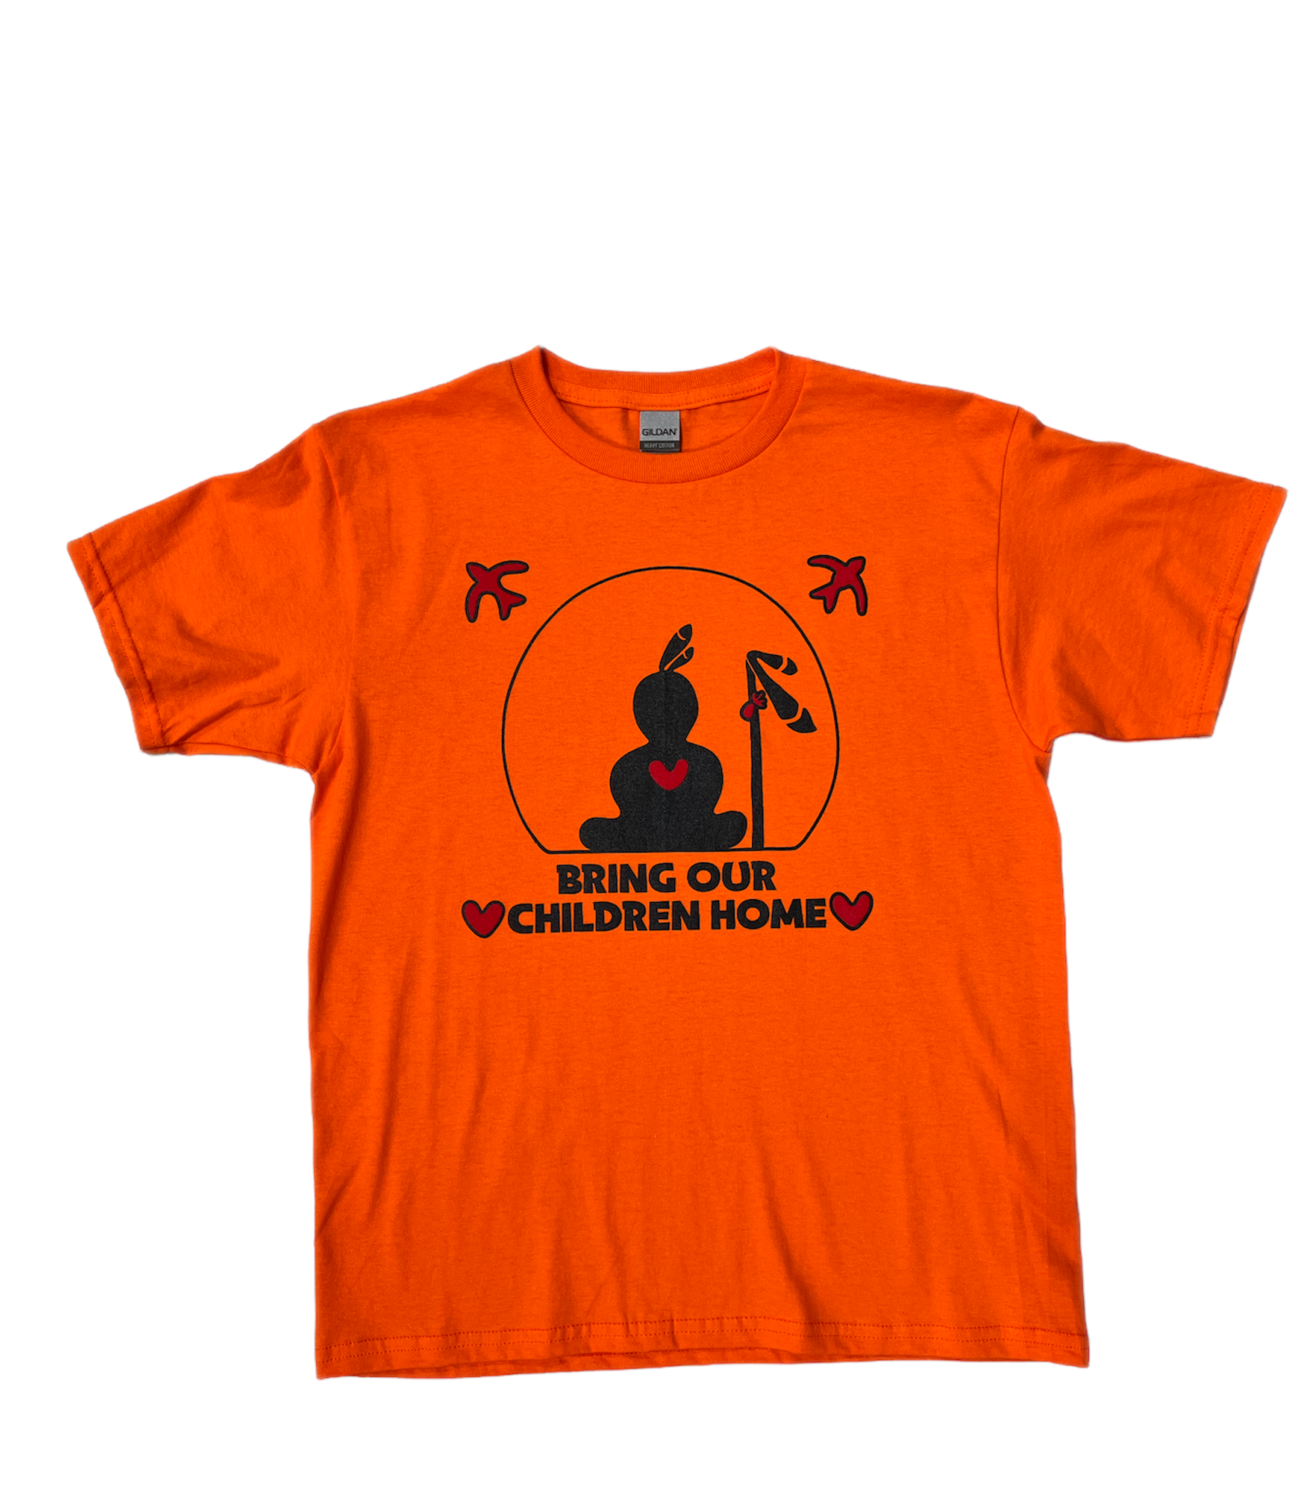 YOUTH - Orange T-Shirt with "Bring Our Children Home" Logo